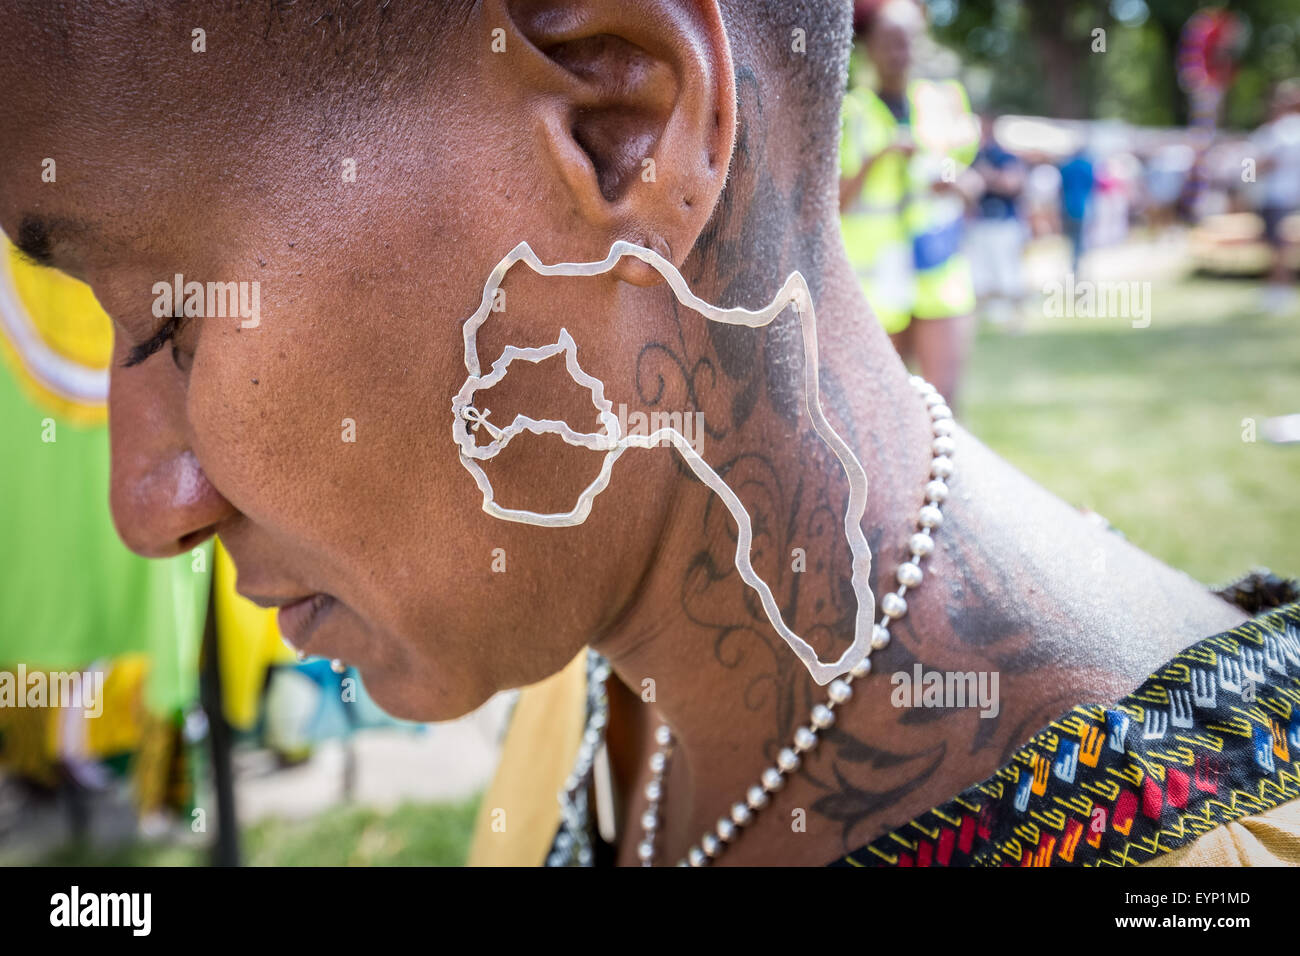 London, UK. 2nd August, 2015. African shaped earring. 10th Brixton Splash Street Festival in South London. Credit:  Guy Corbishley/Alamy Live News Stock Photo